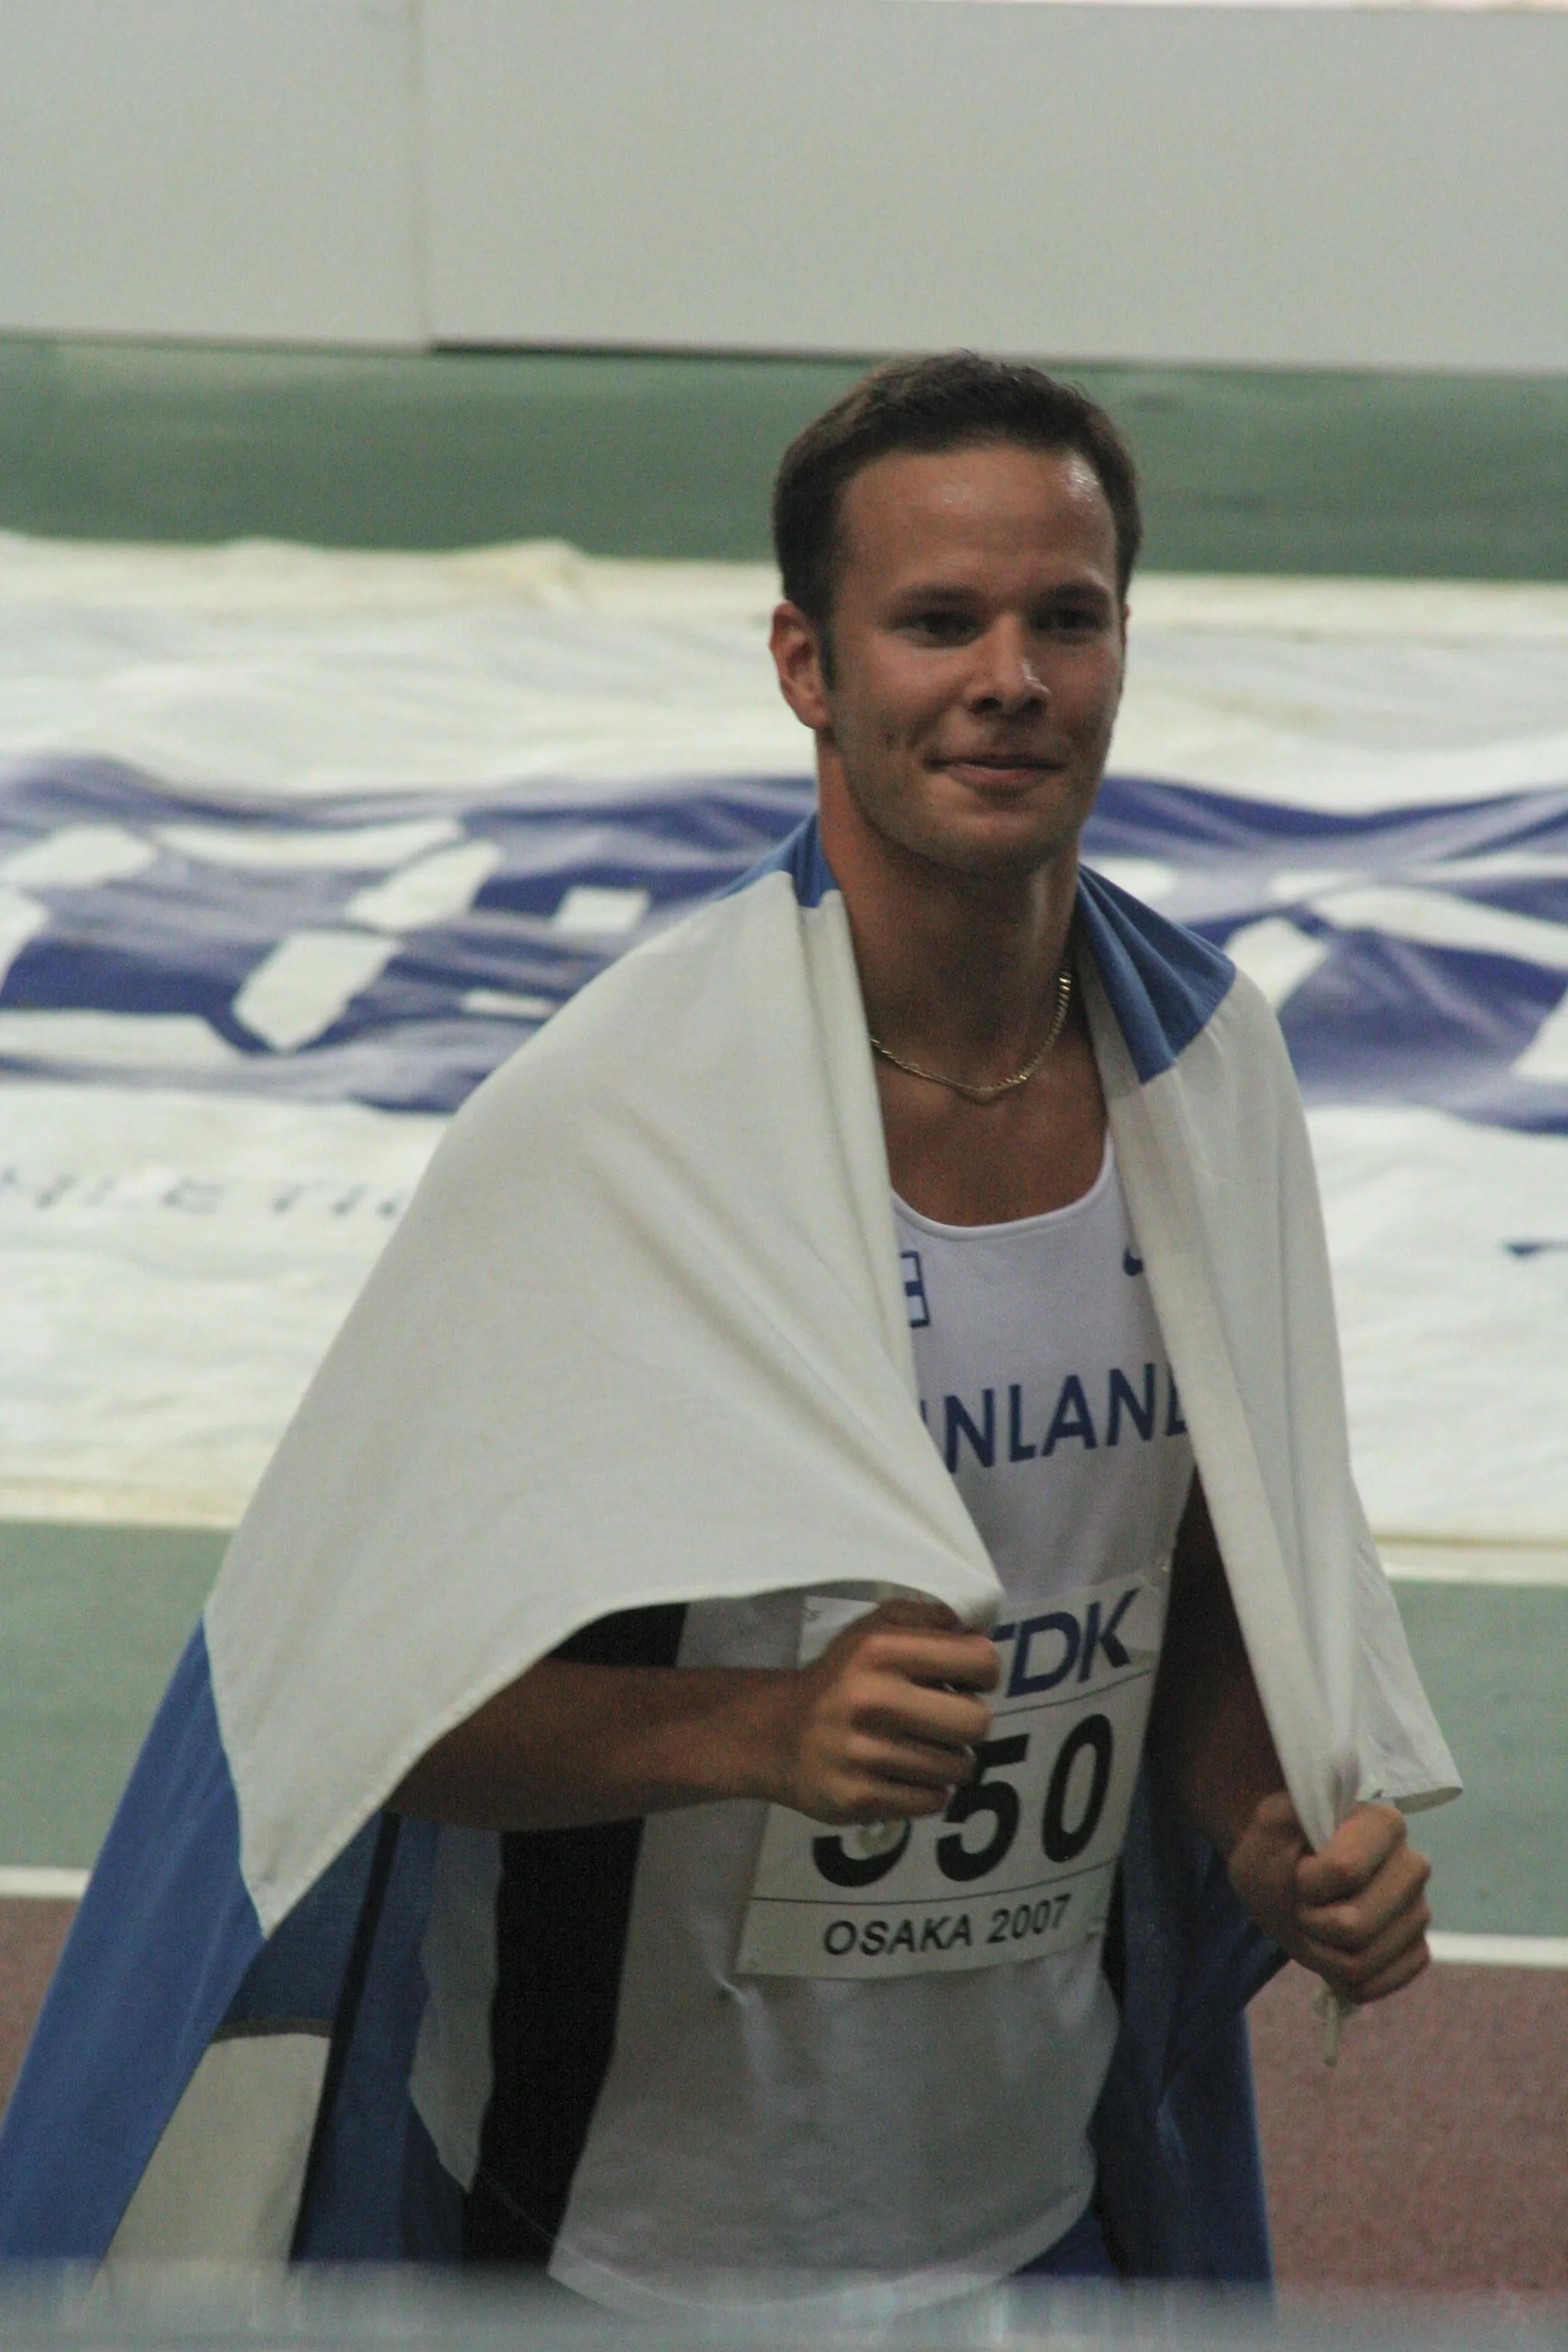 Photo showing: World Athletics Championships 2007 in Osaka - Tero Pitkämäki celebrates his victory in the javelin competition